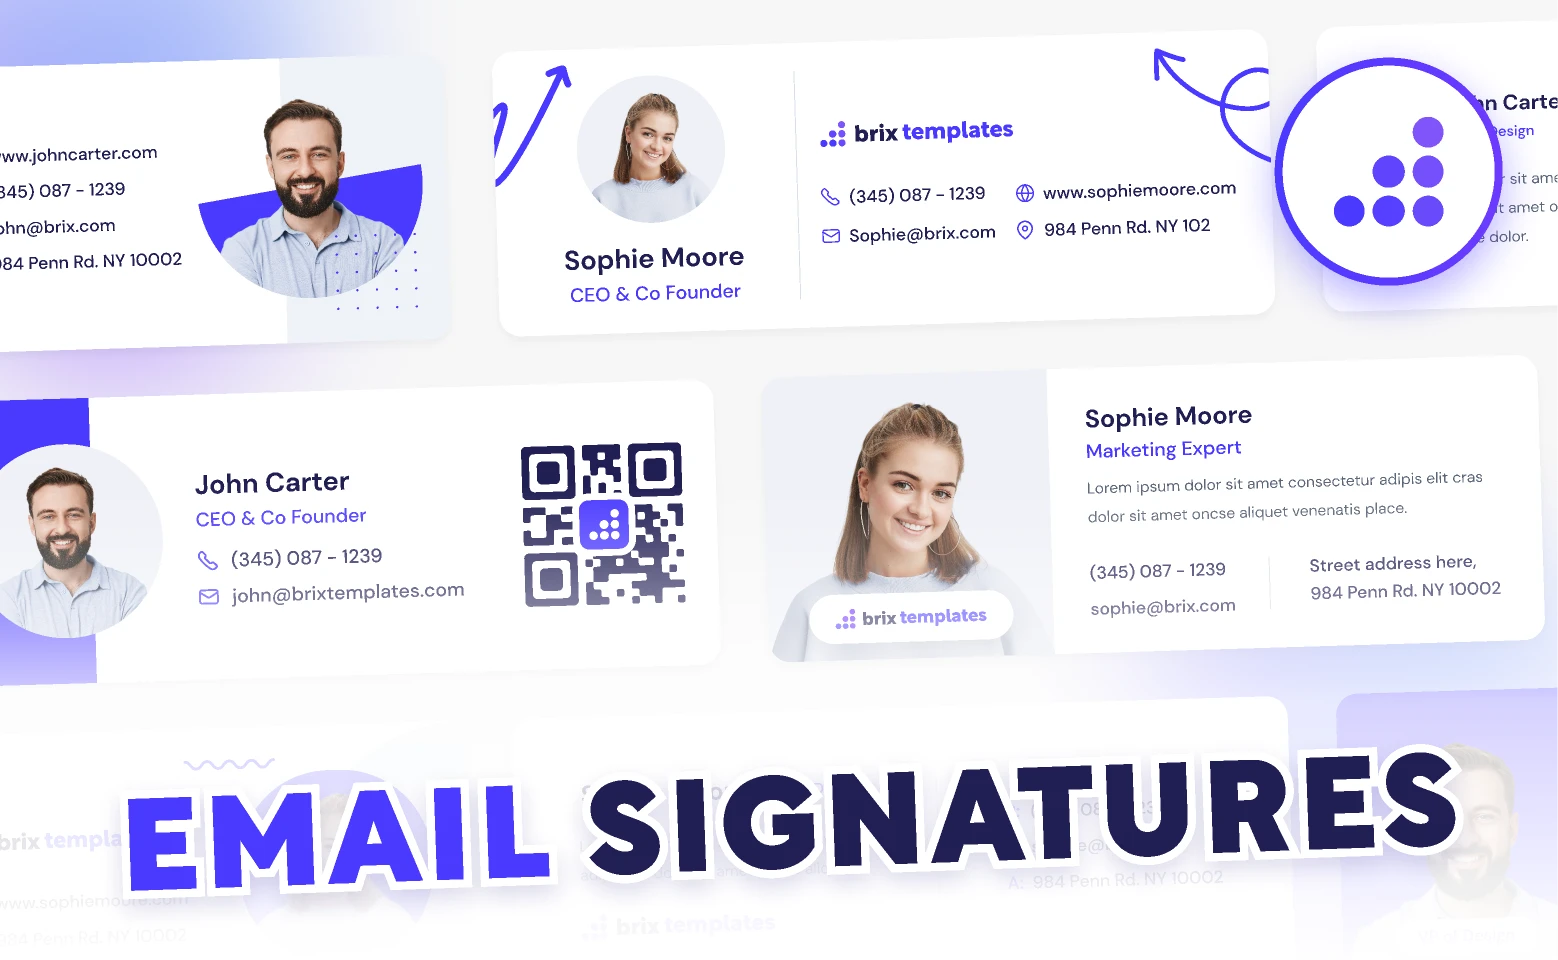 25+ Email Signatures | BRIX Templates - Cloneables for Figma and Adobe XD